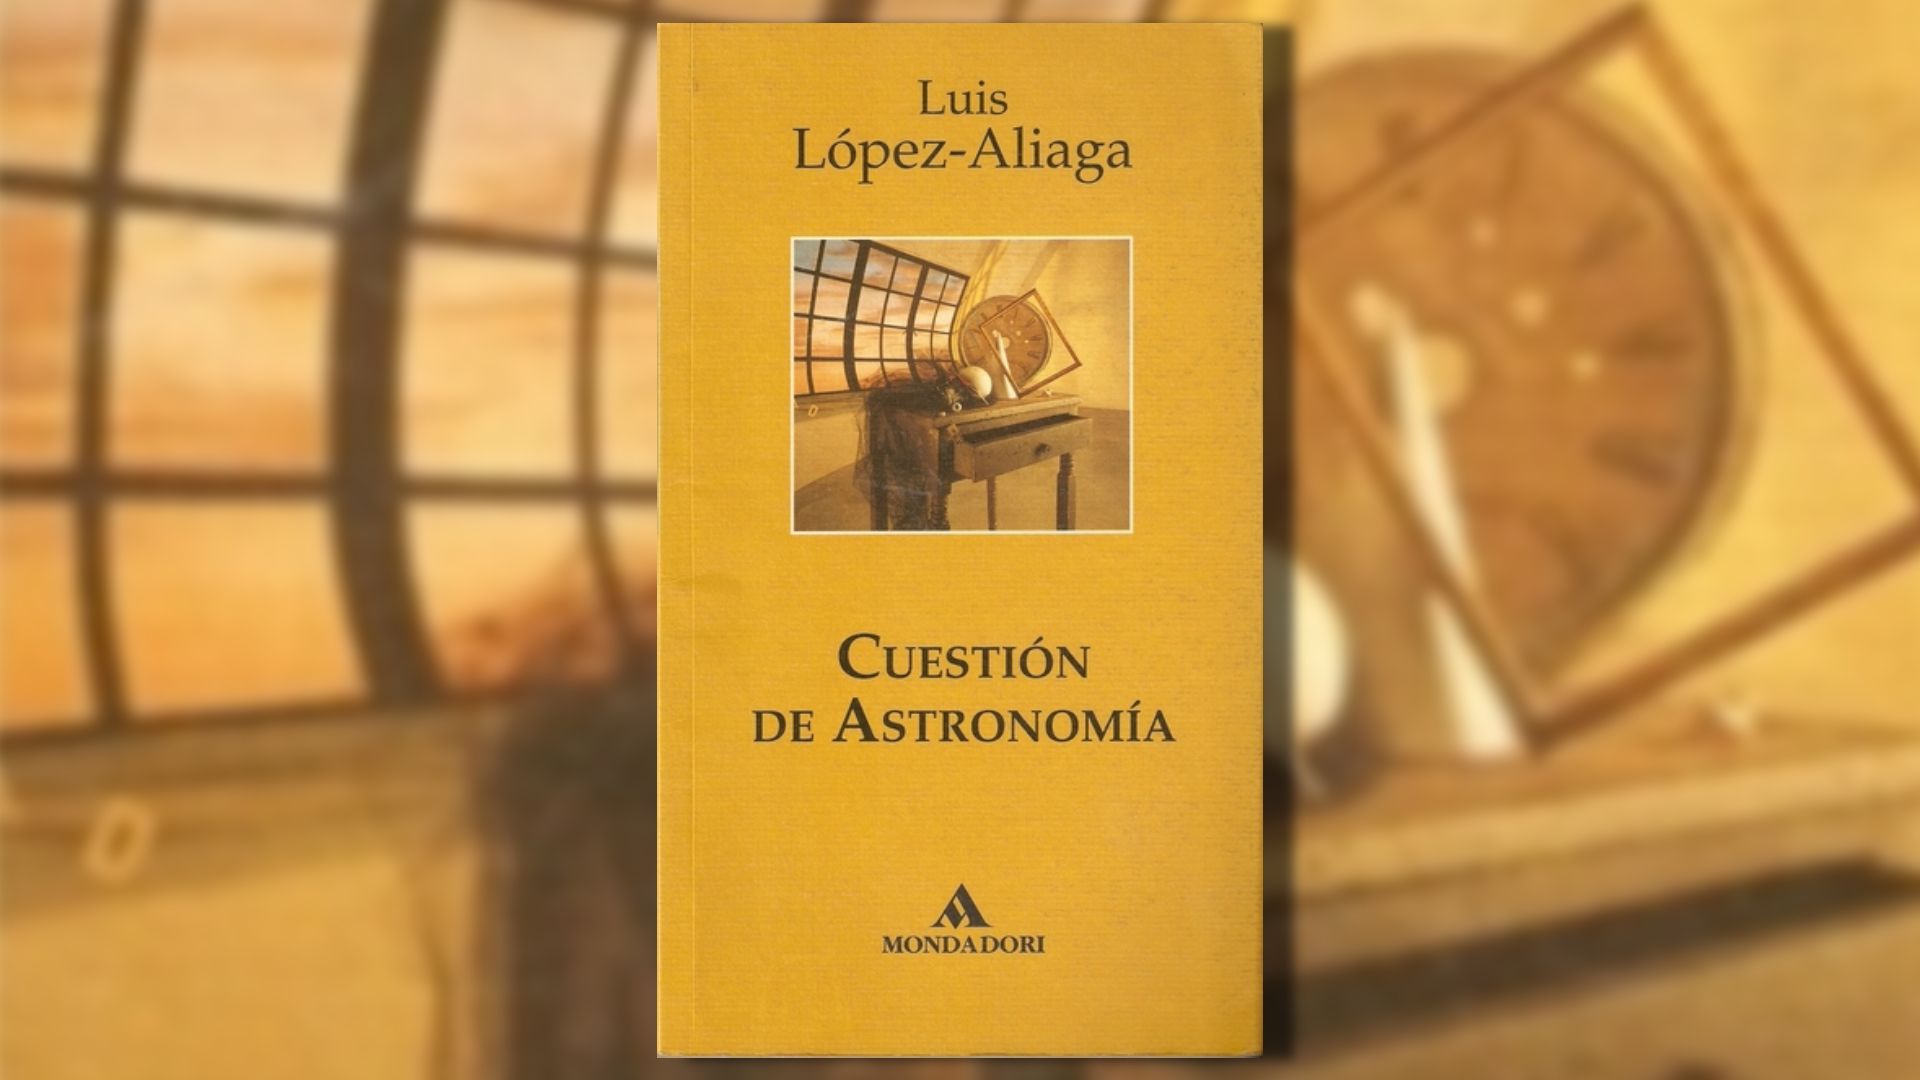 "Astronomy question"the first book of short stories published by Luis López-Aliaga in 1995.